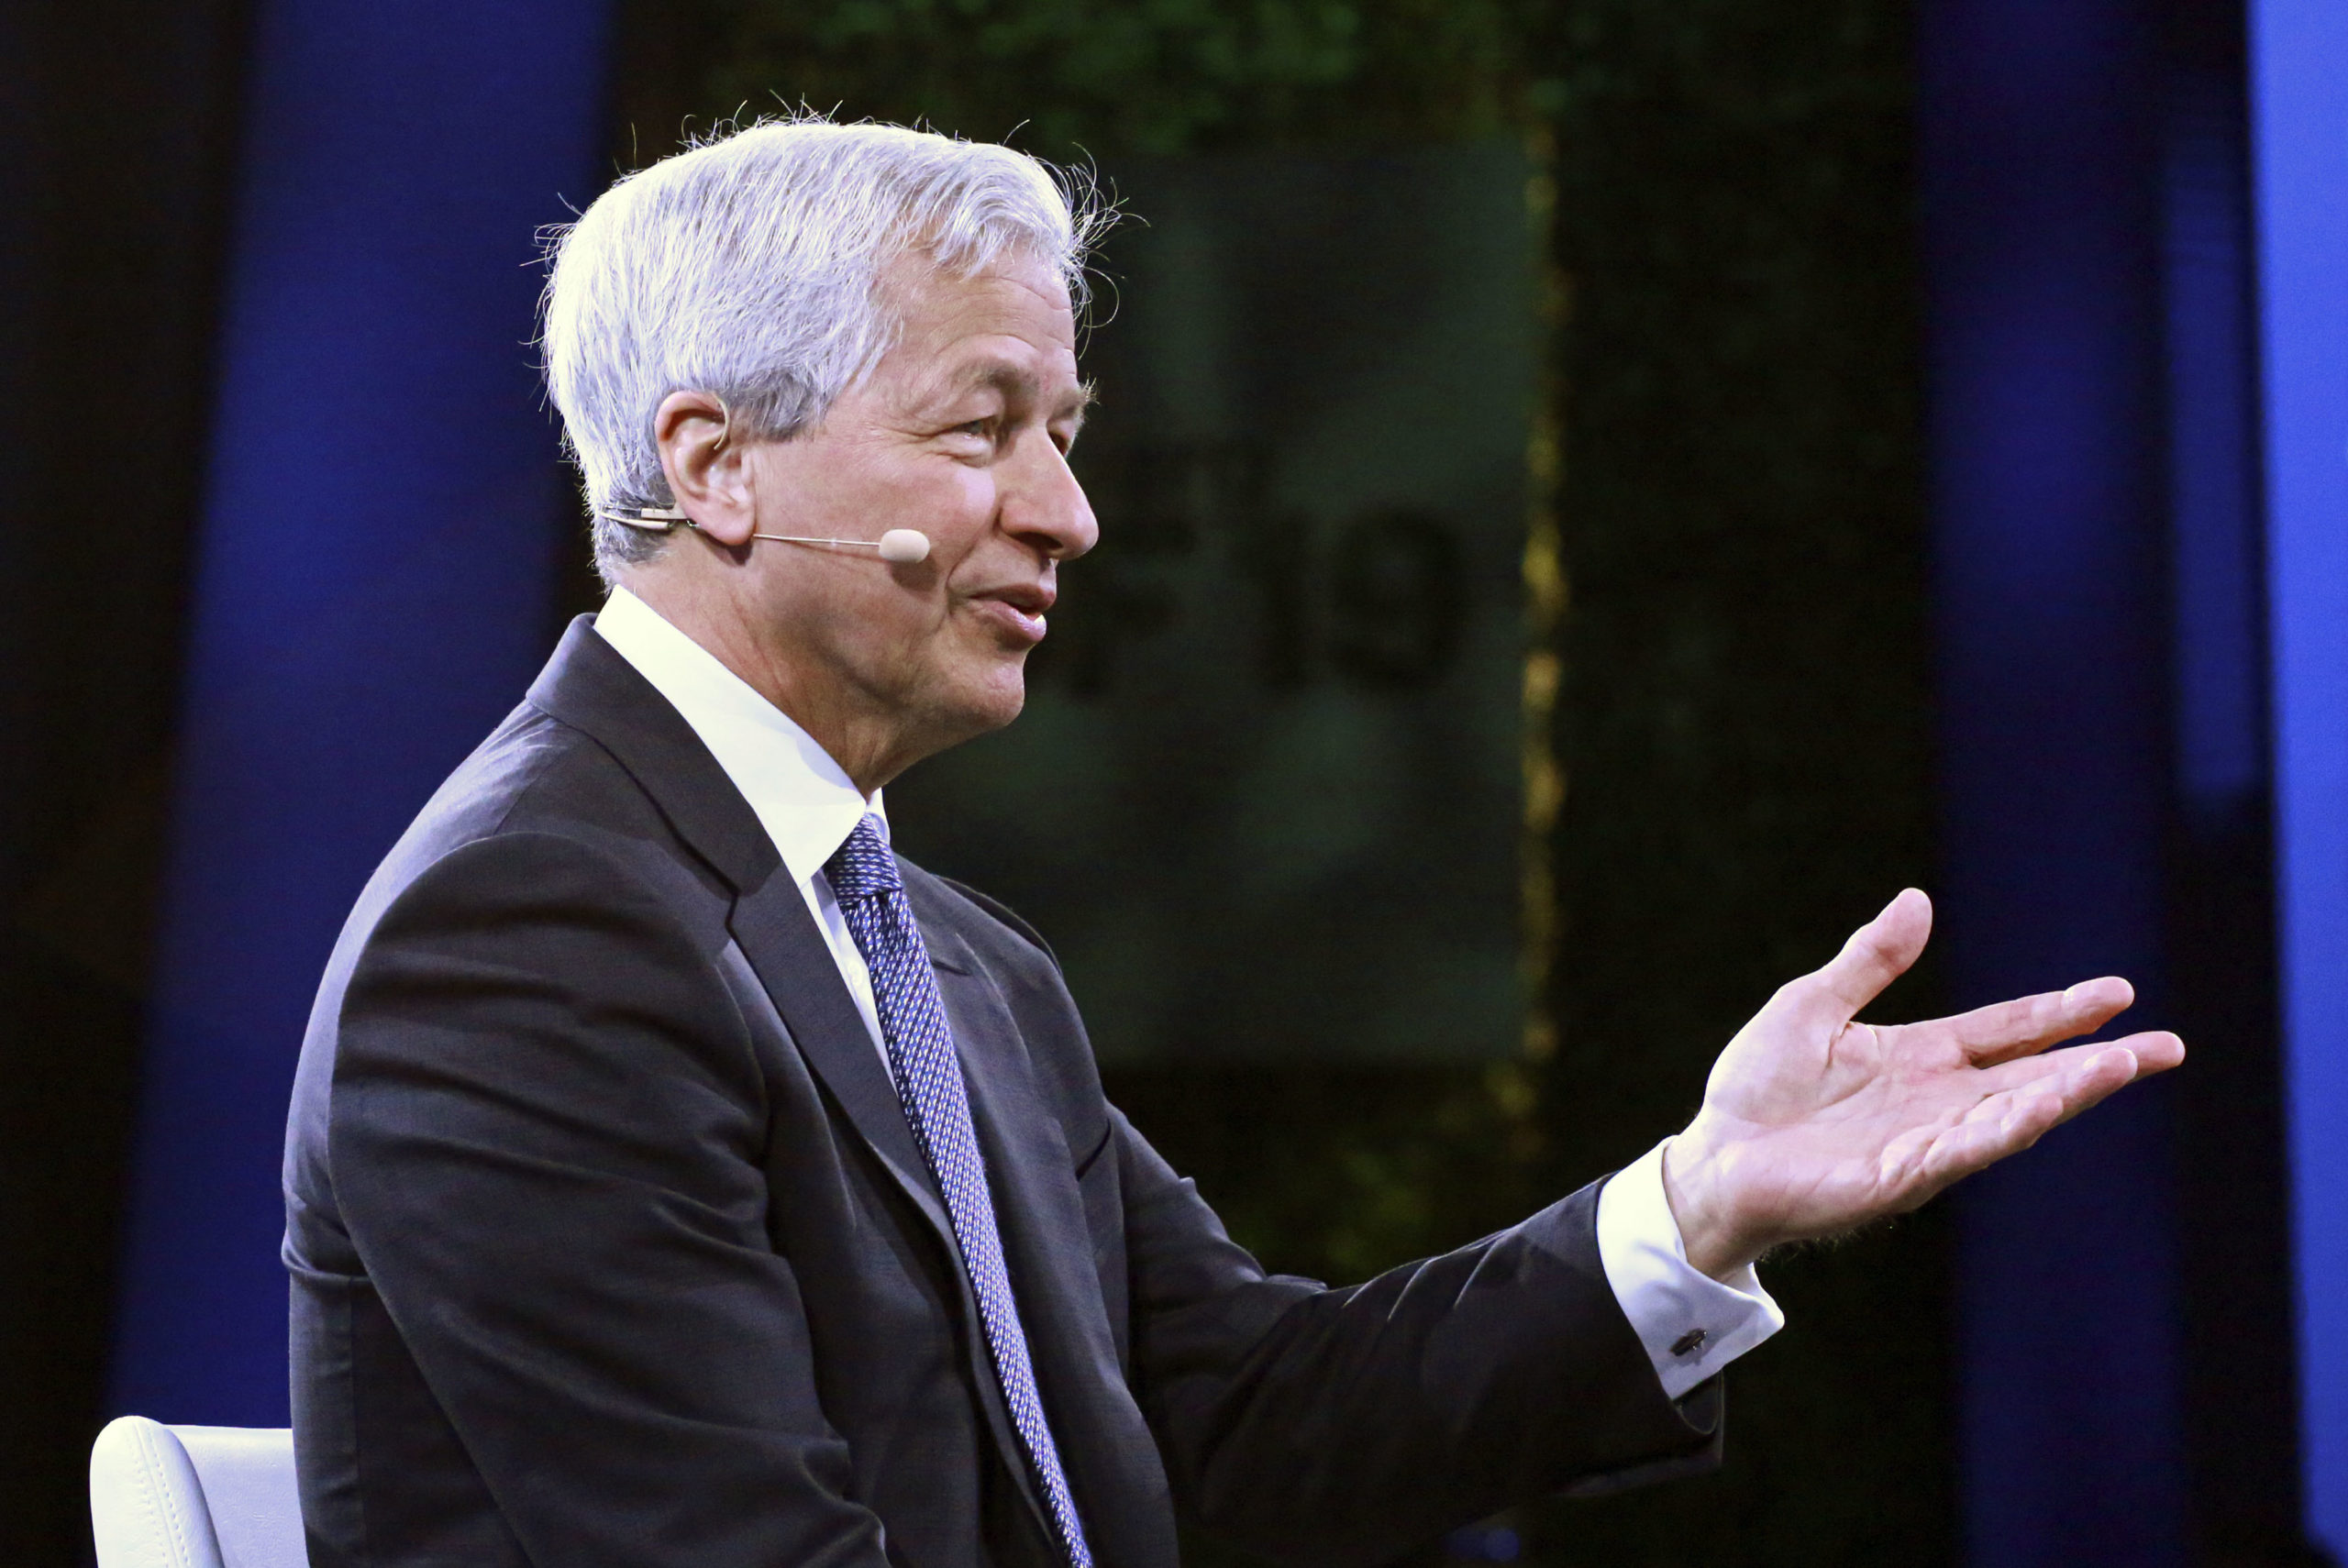 CEO of JP Morgan Chase & Co, speaks during the Bloomberg Global Business Forum in New York on September 25, 2019. (Photo by KENA BETANCUR/Afp/AFP via Getty Images)